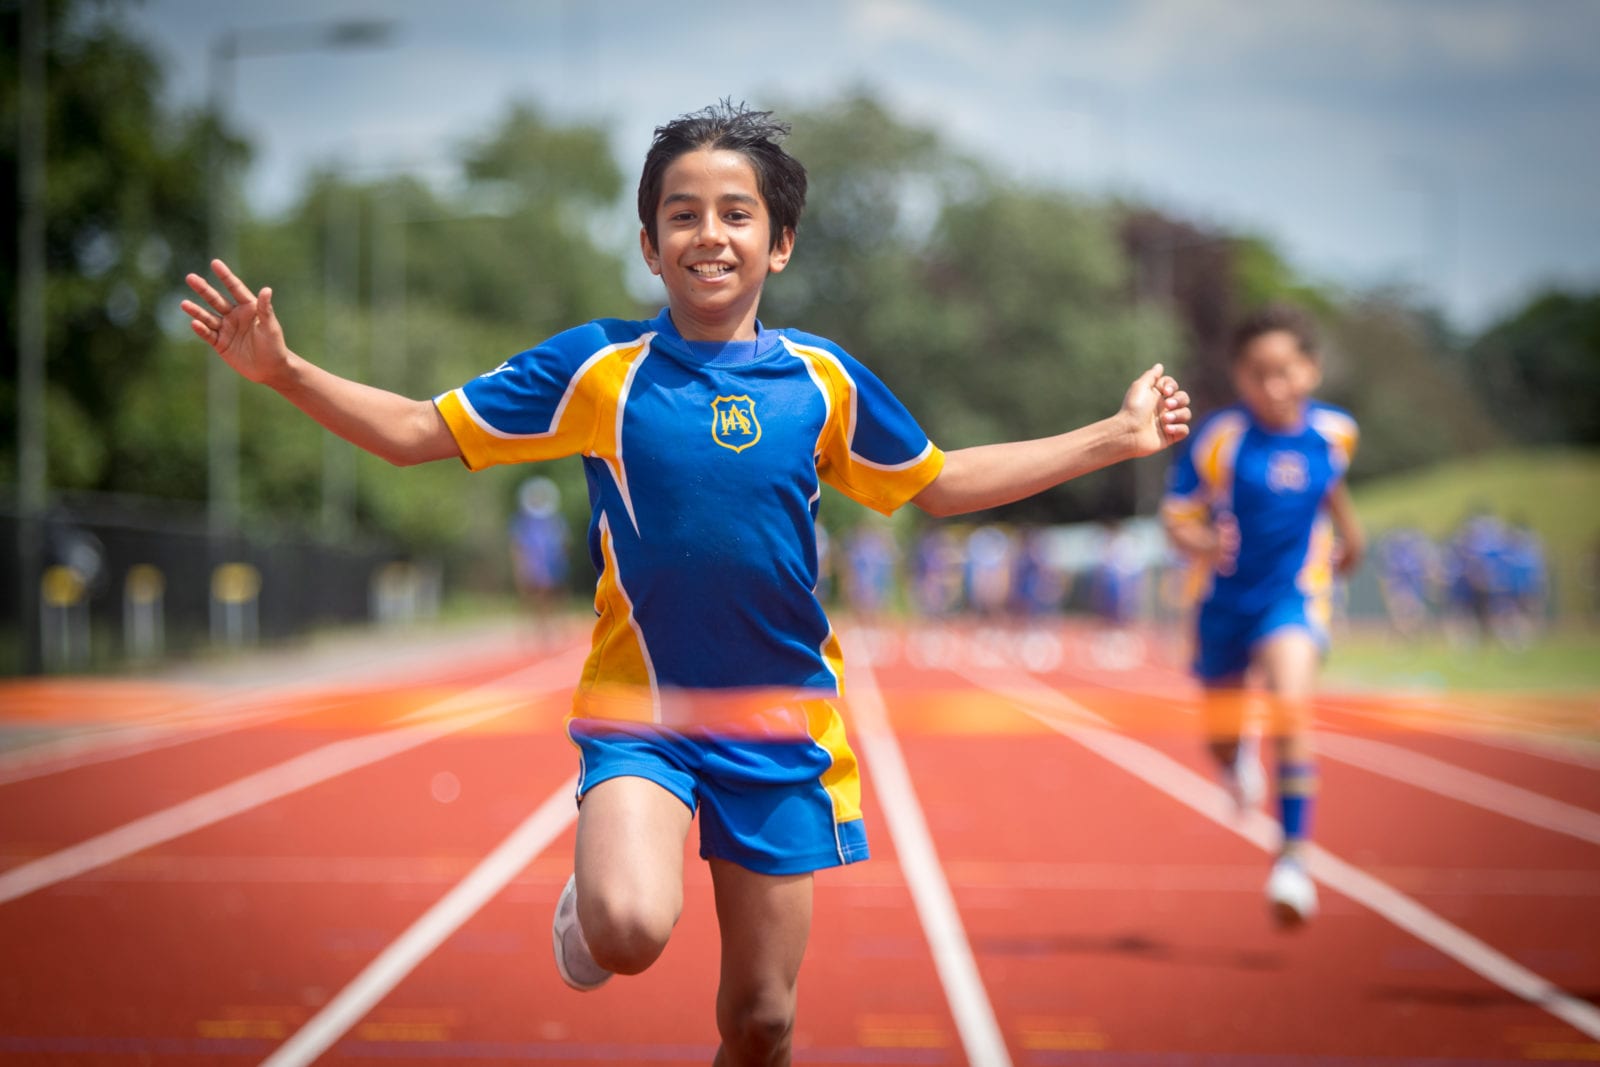 Image of a pupil in sports wear approaching the finishing live on a race track - www.ashtonhouse.com